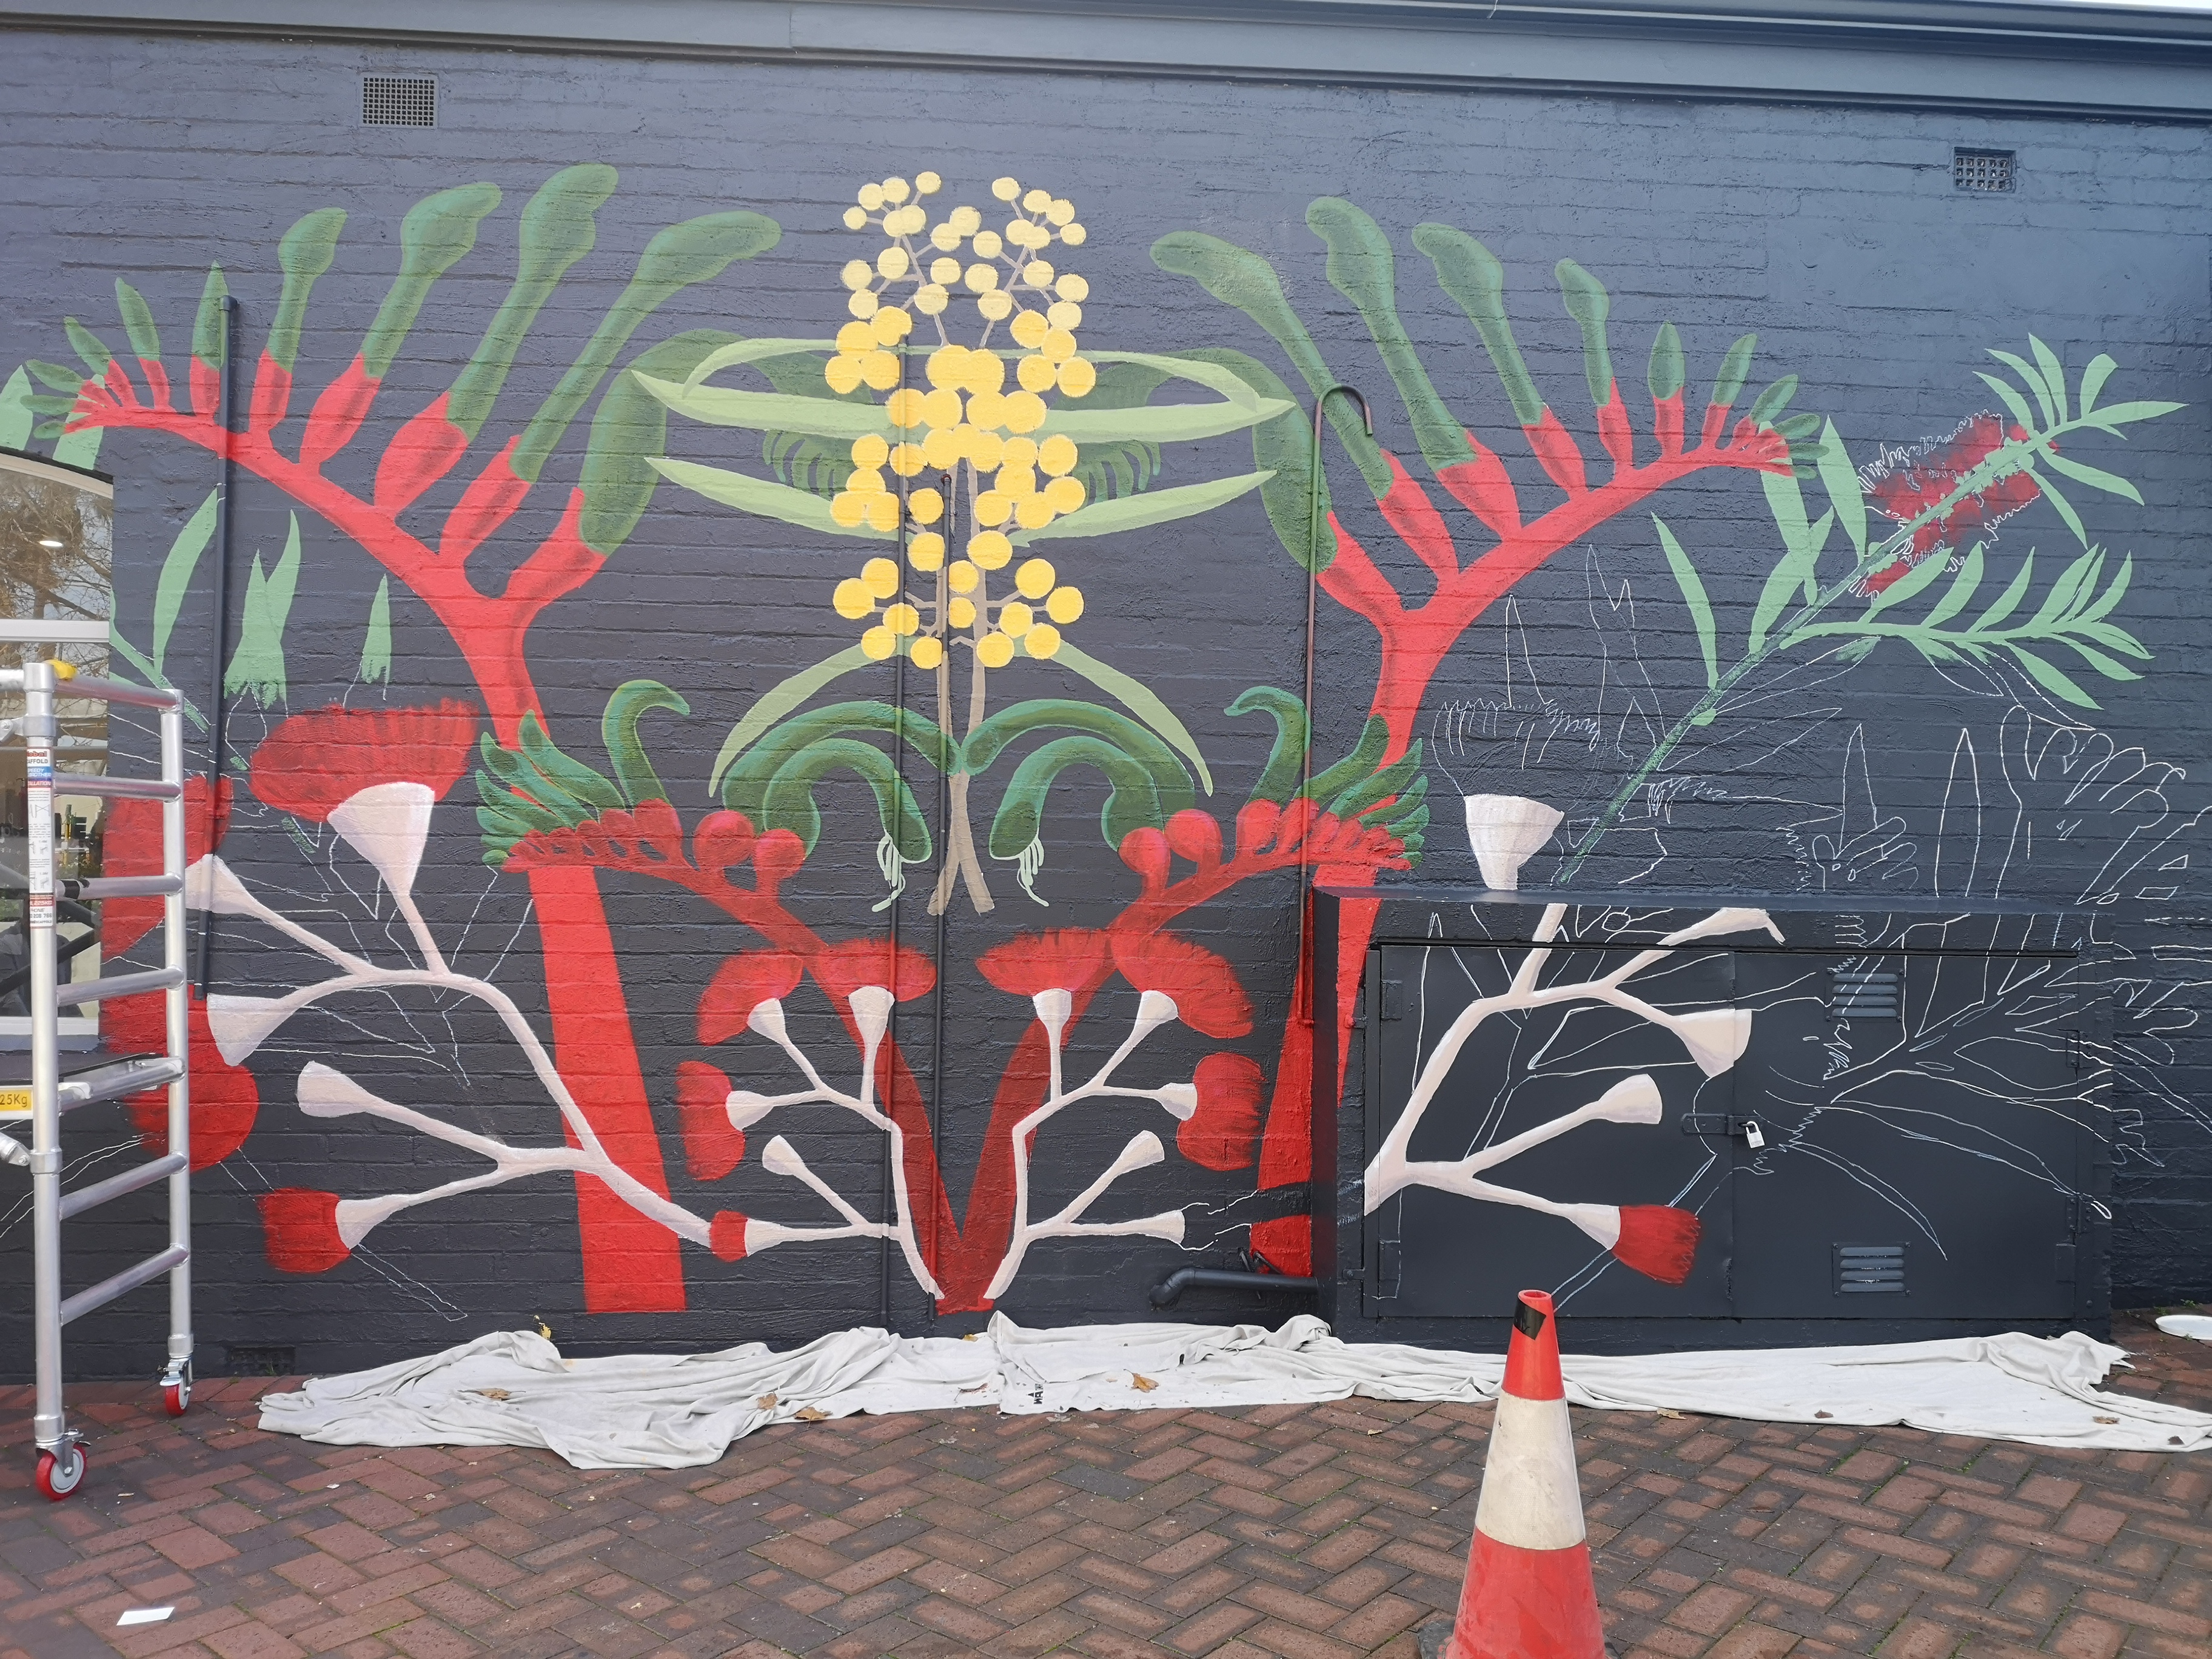 Second mural Connect South Garden Suburb